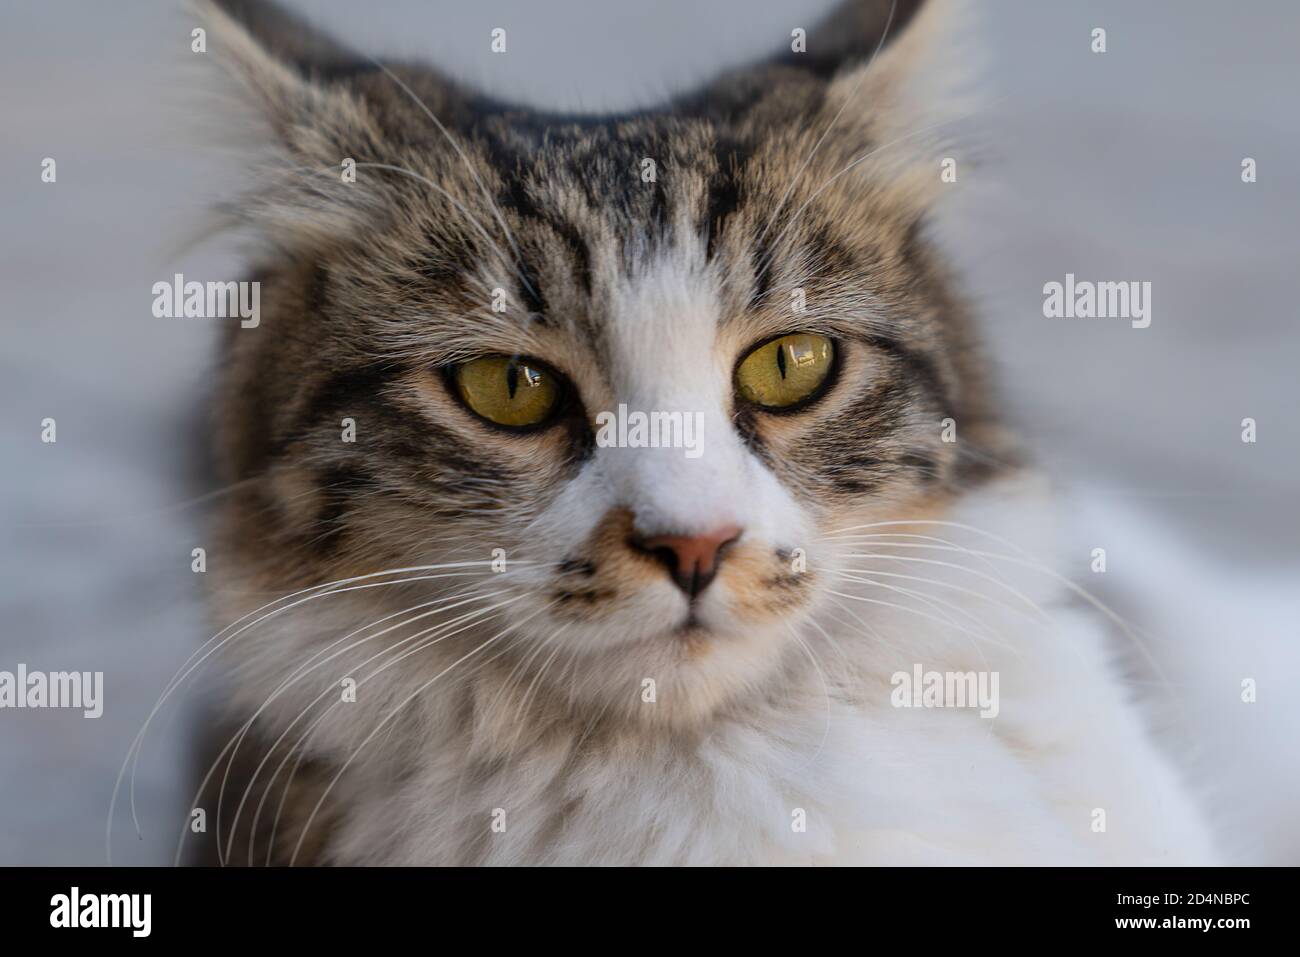 Closeup lovely brown cat looking tiredly Stock Photo